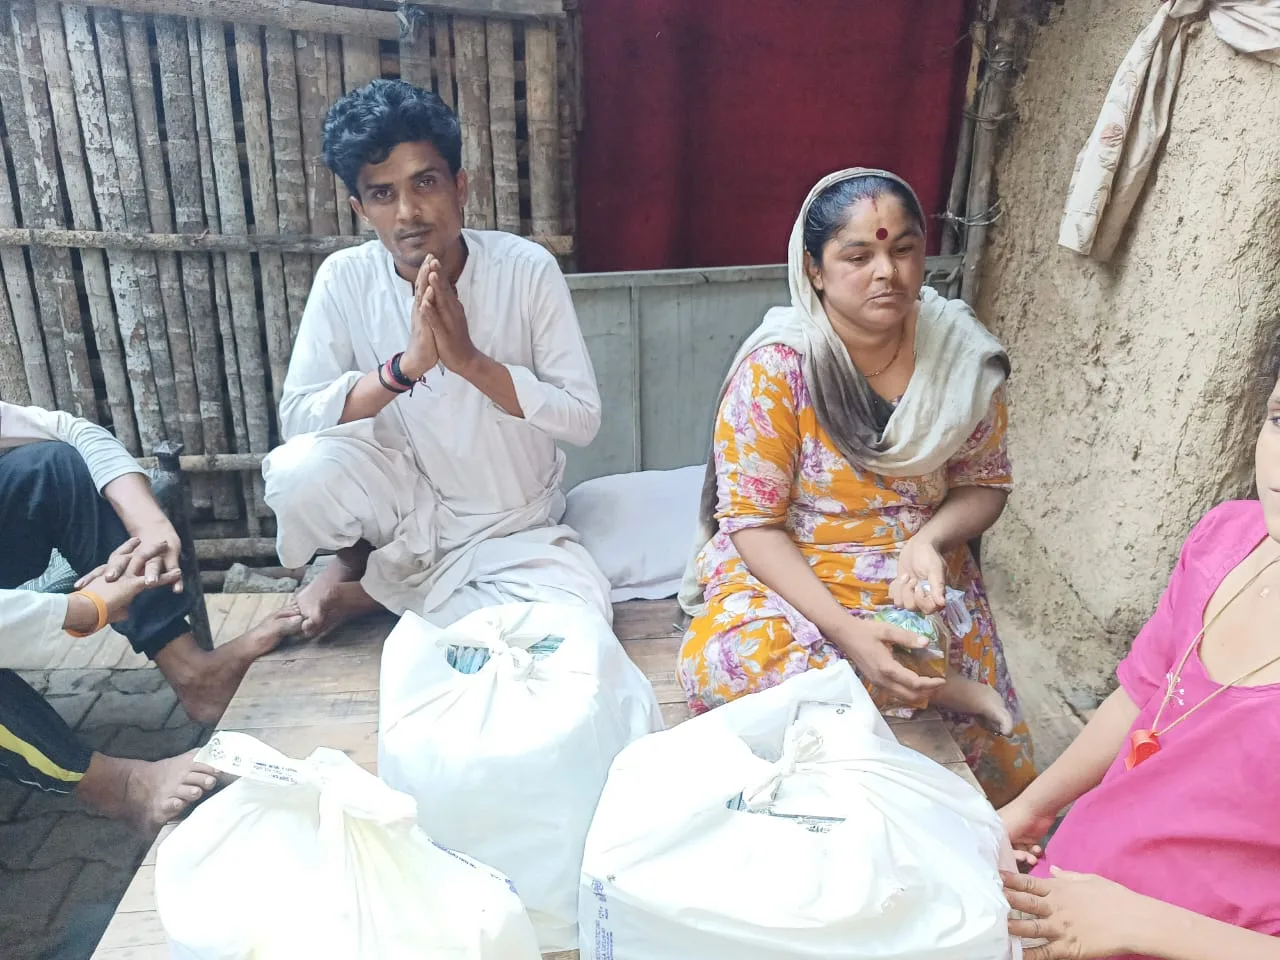 Ration supplies for flood-affected refugee Hindu families in Delhi